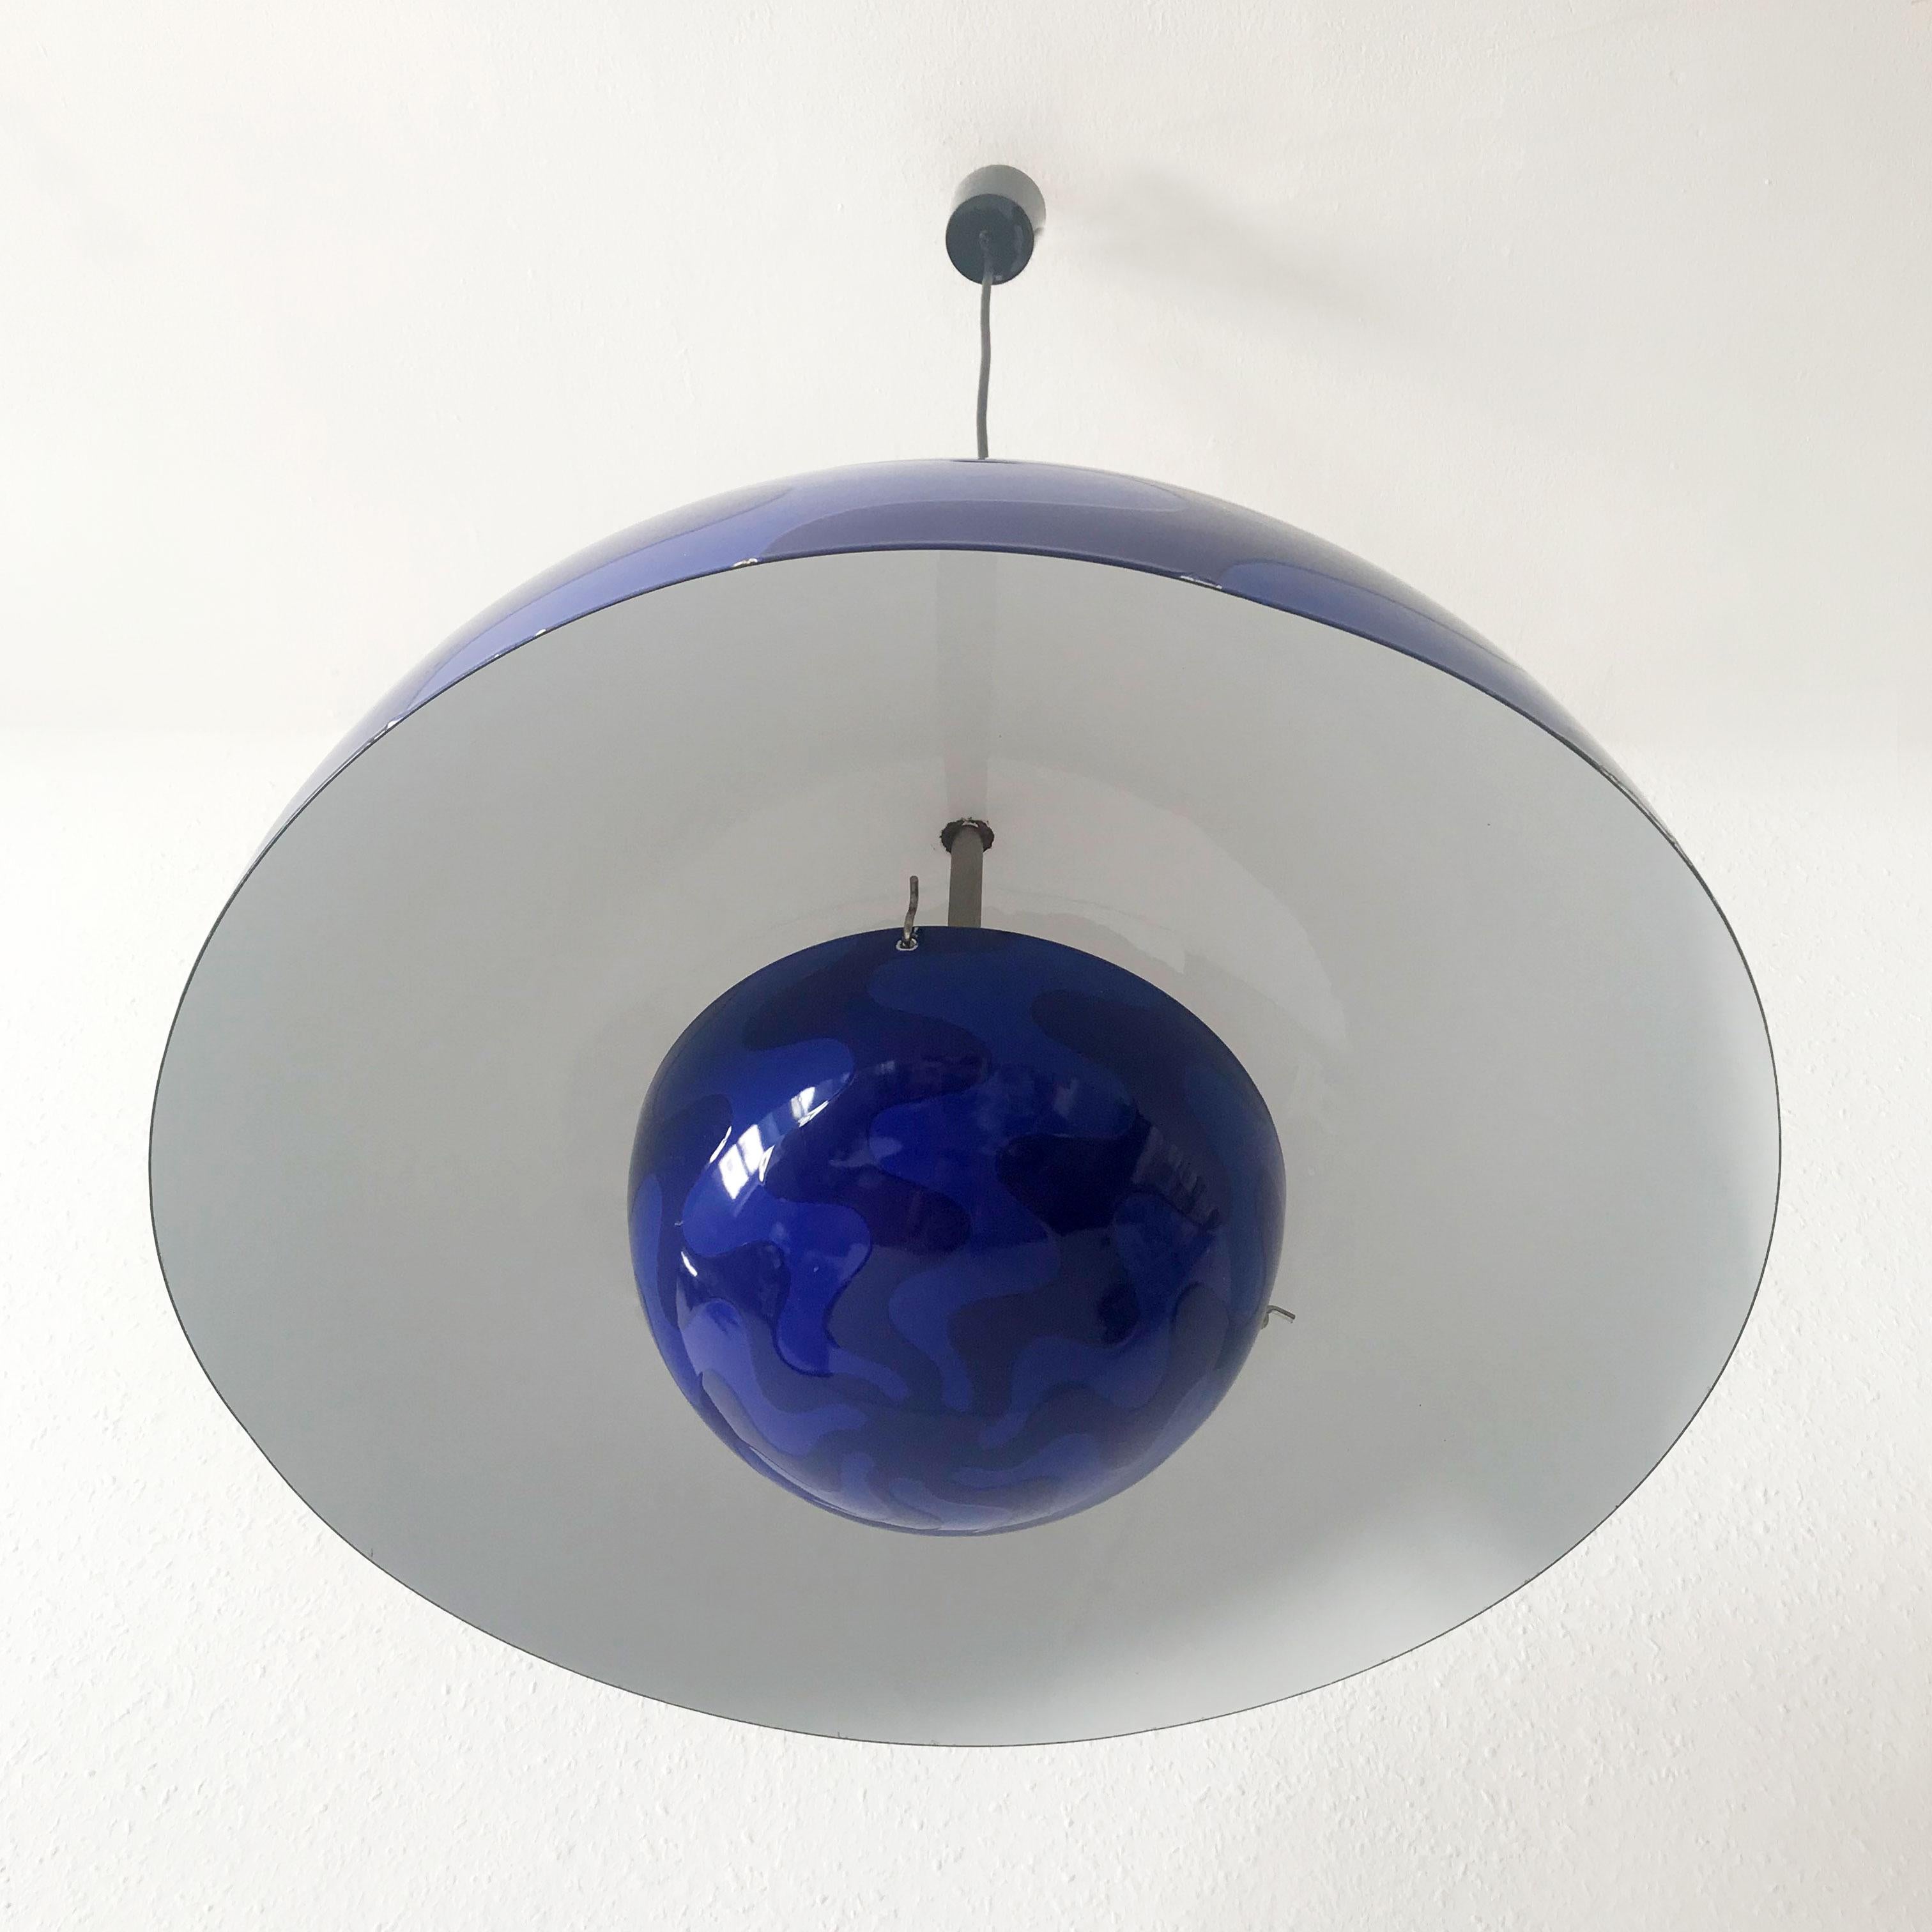 Rare and Large Flower Pot Pendant Lamp by Verner Panton for Louis Poulsen 1971 For Sale 3